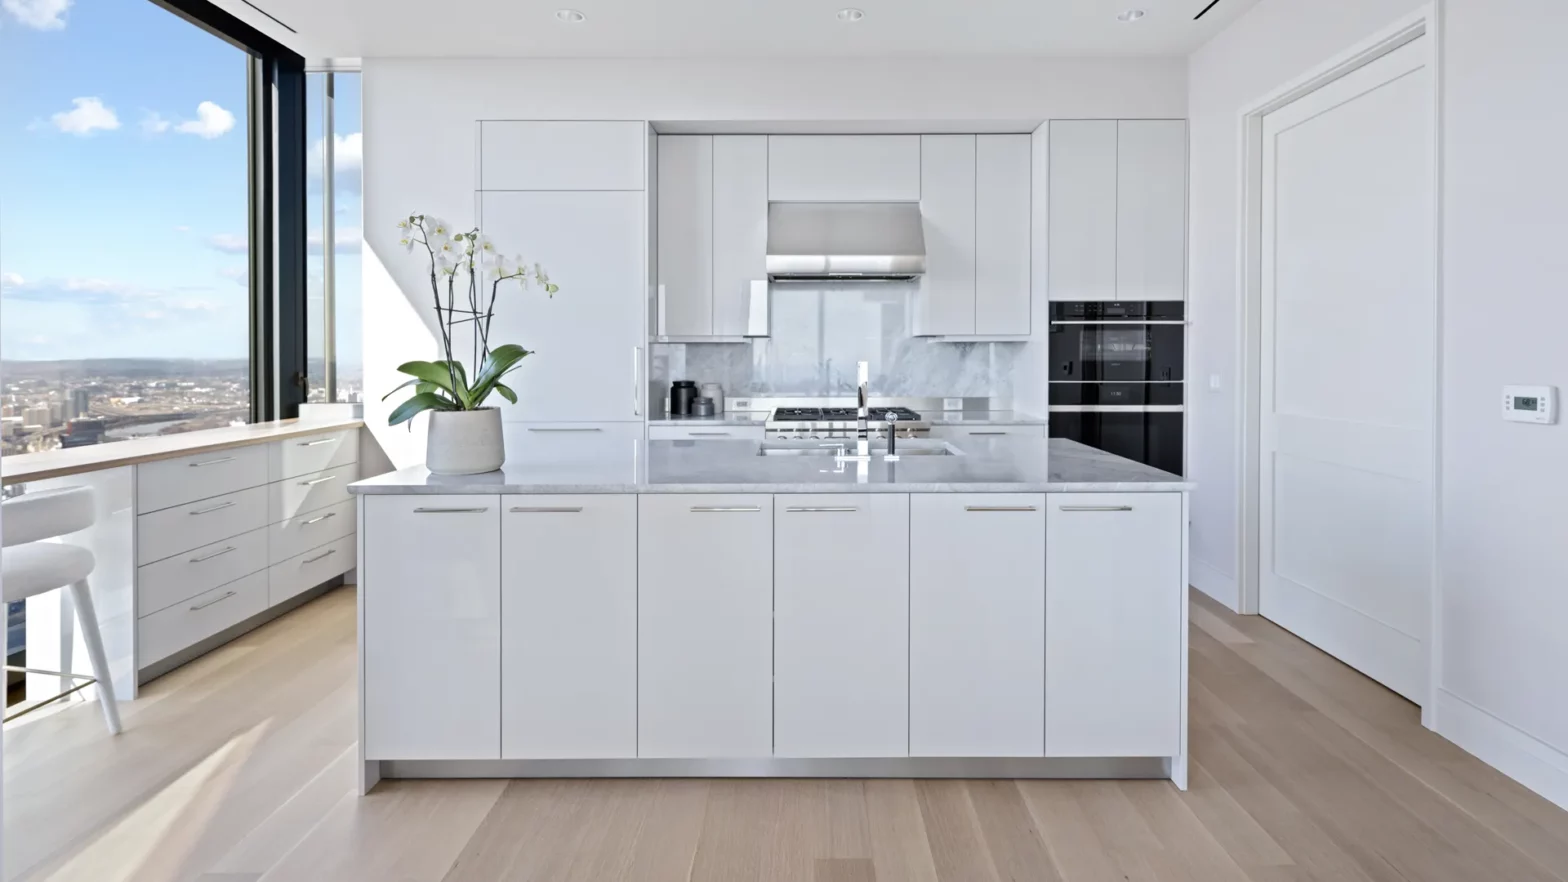 Four Seasons One Dalton Signature Residence kitchen with island and floor-to-ceiling windows overlooking Back Bay, Boston.